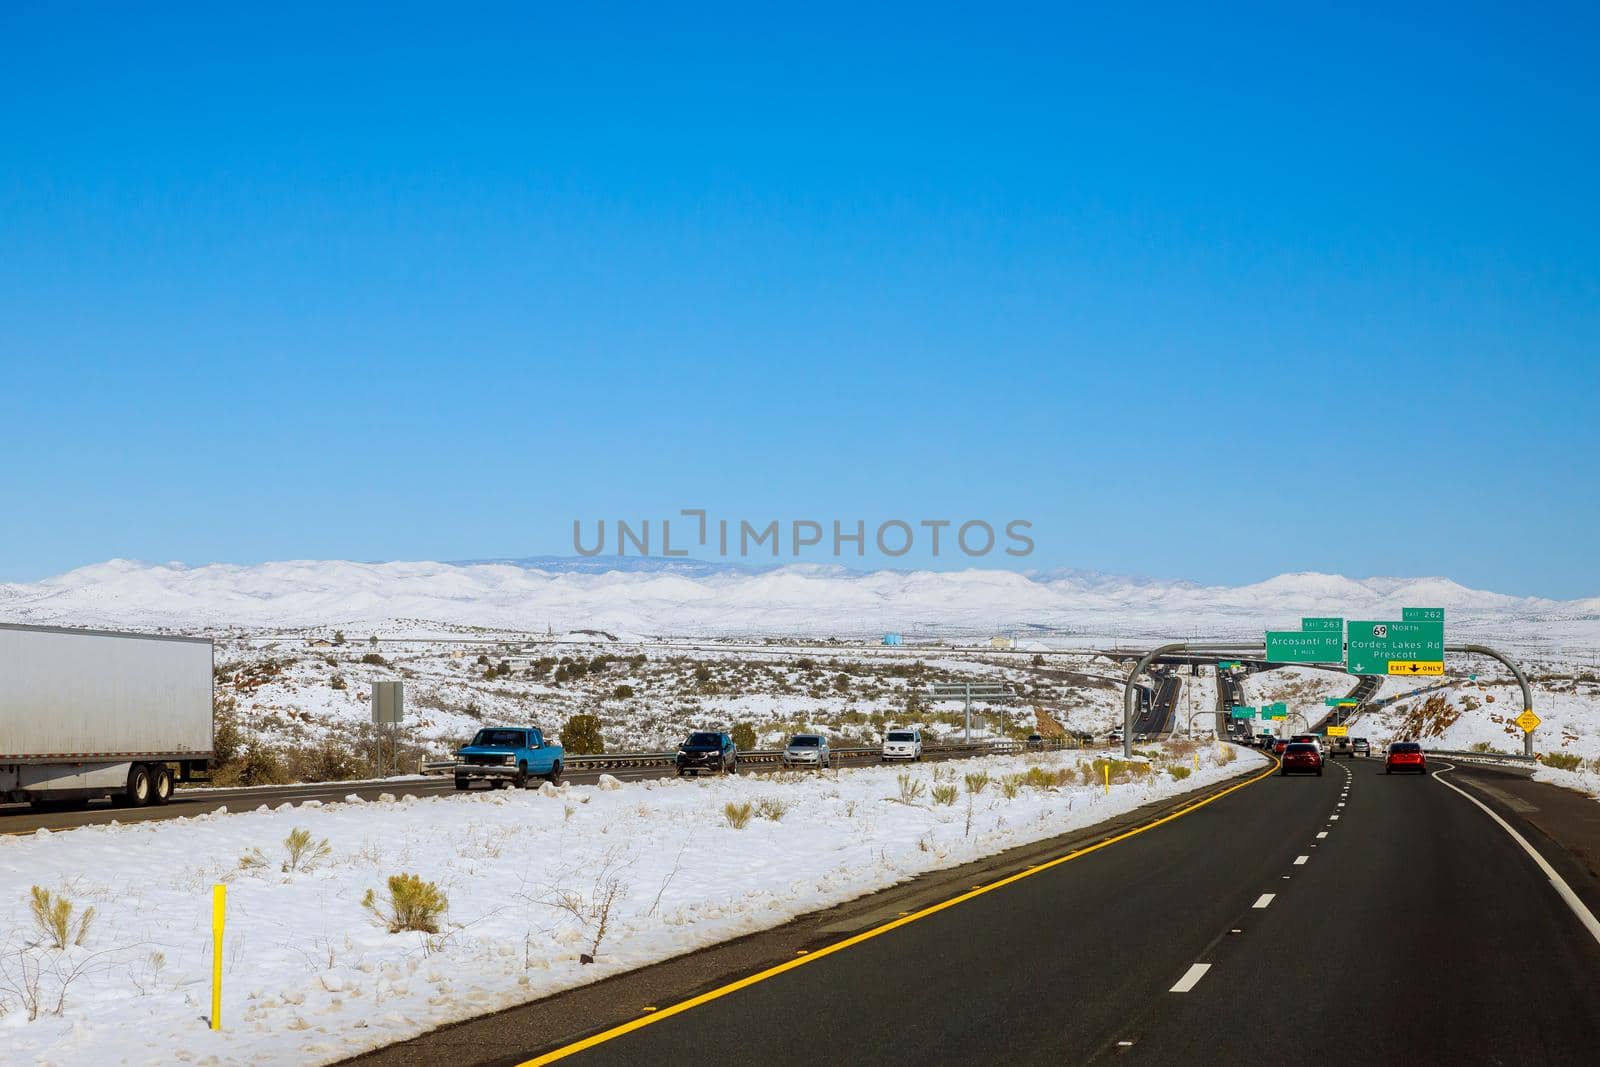 View of the I-17 Interchange valley landscape in winter with snow, Arizona US